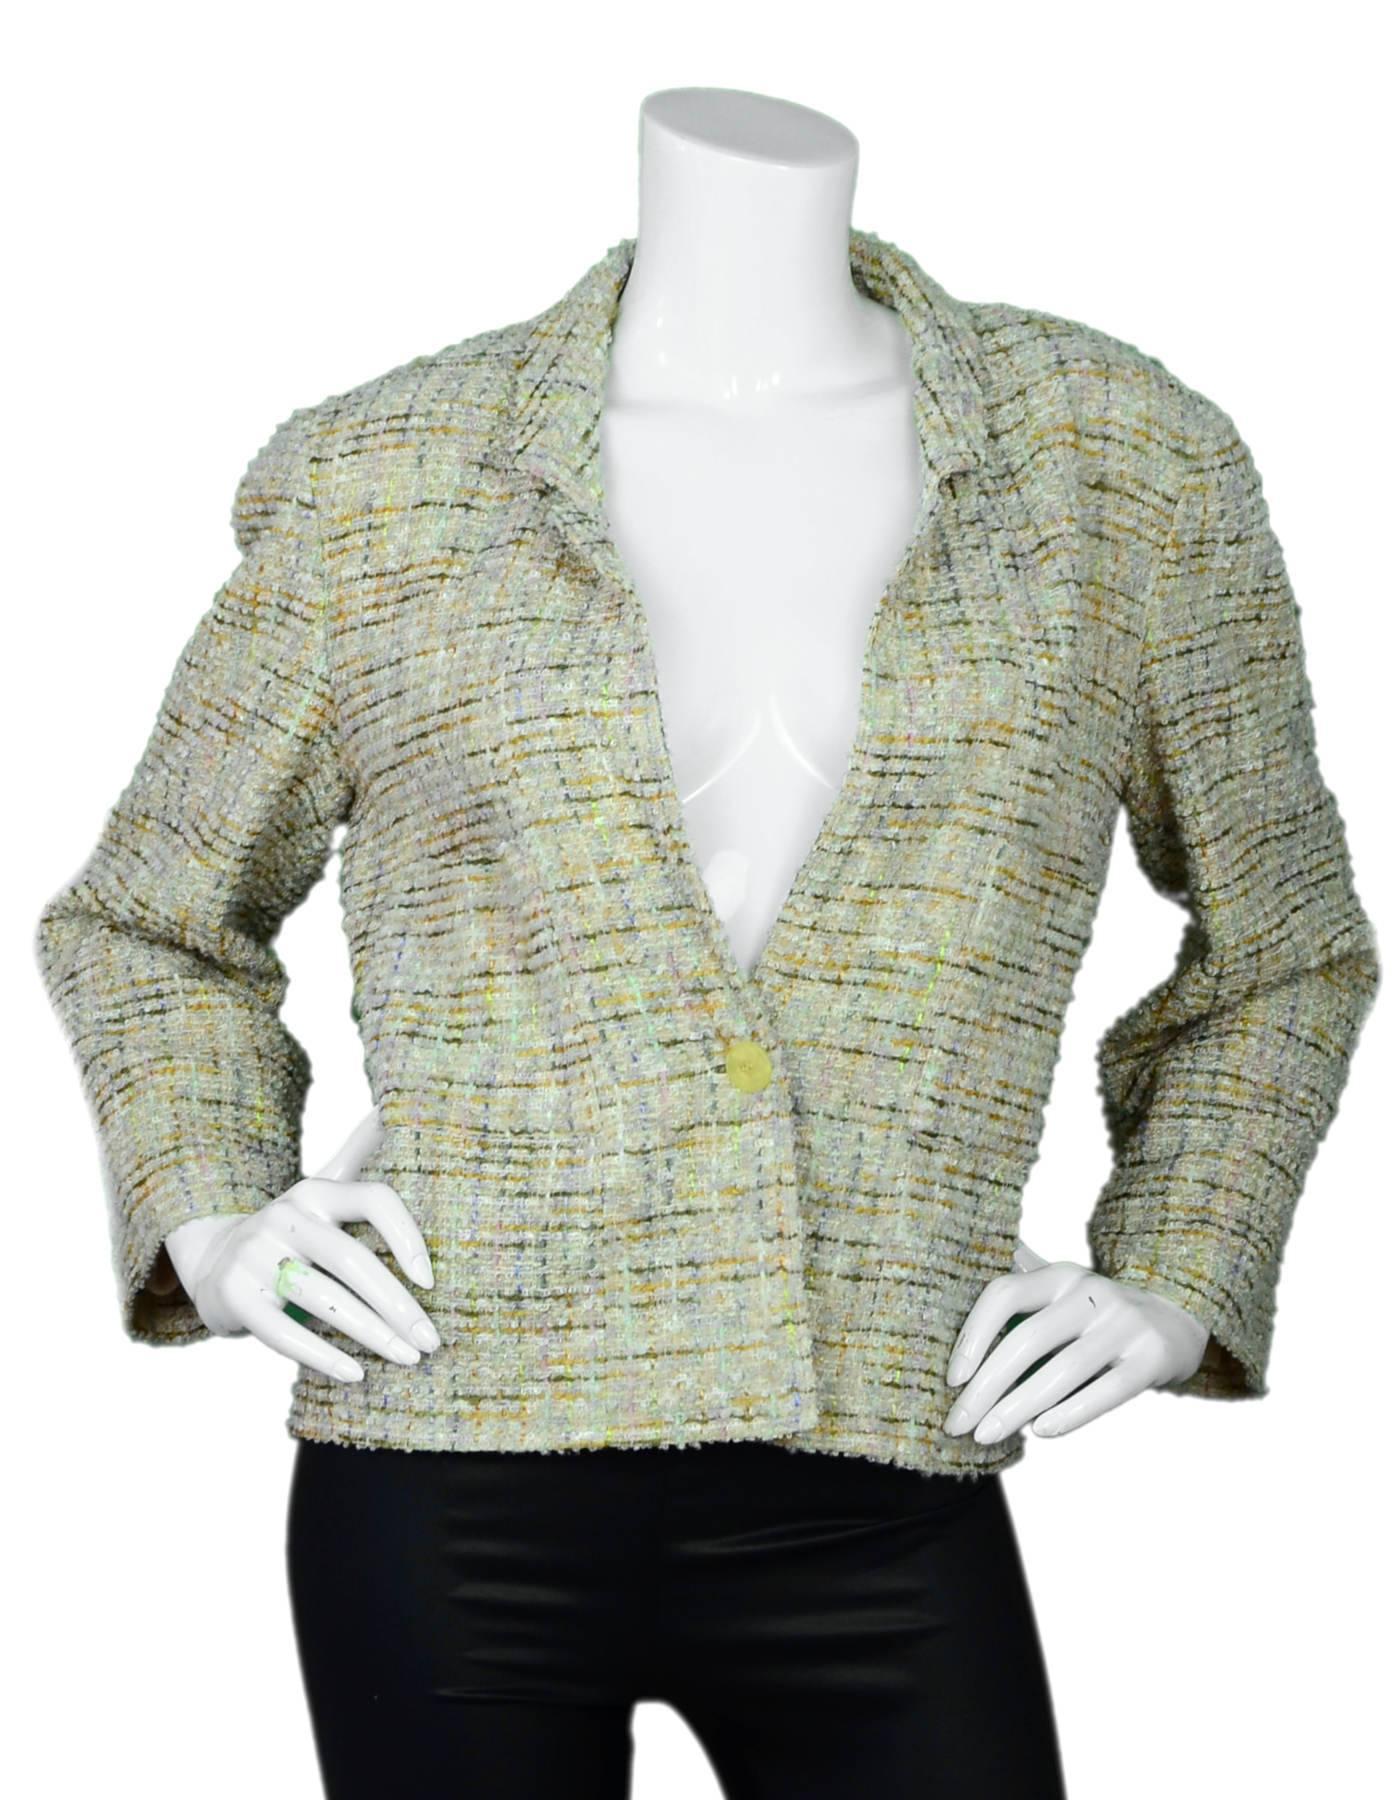 Chanel Beige & Multi-Colored Tweed Jacket Sz FR42

Made In: France
Color: Beige, multi
Year Of Production: 1999
Composition: 42% polyester, 34% wool, 16% rayon, 6% acrylic, 2% cotton
Lining: Nude mesh
Closure/Opening: Front single button